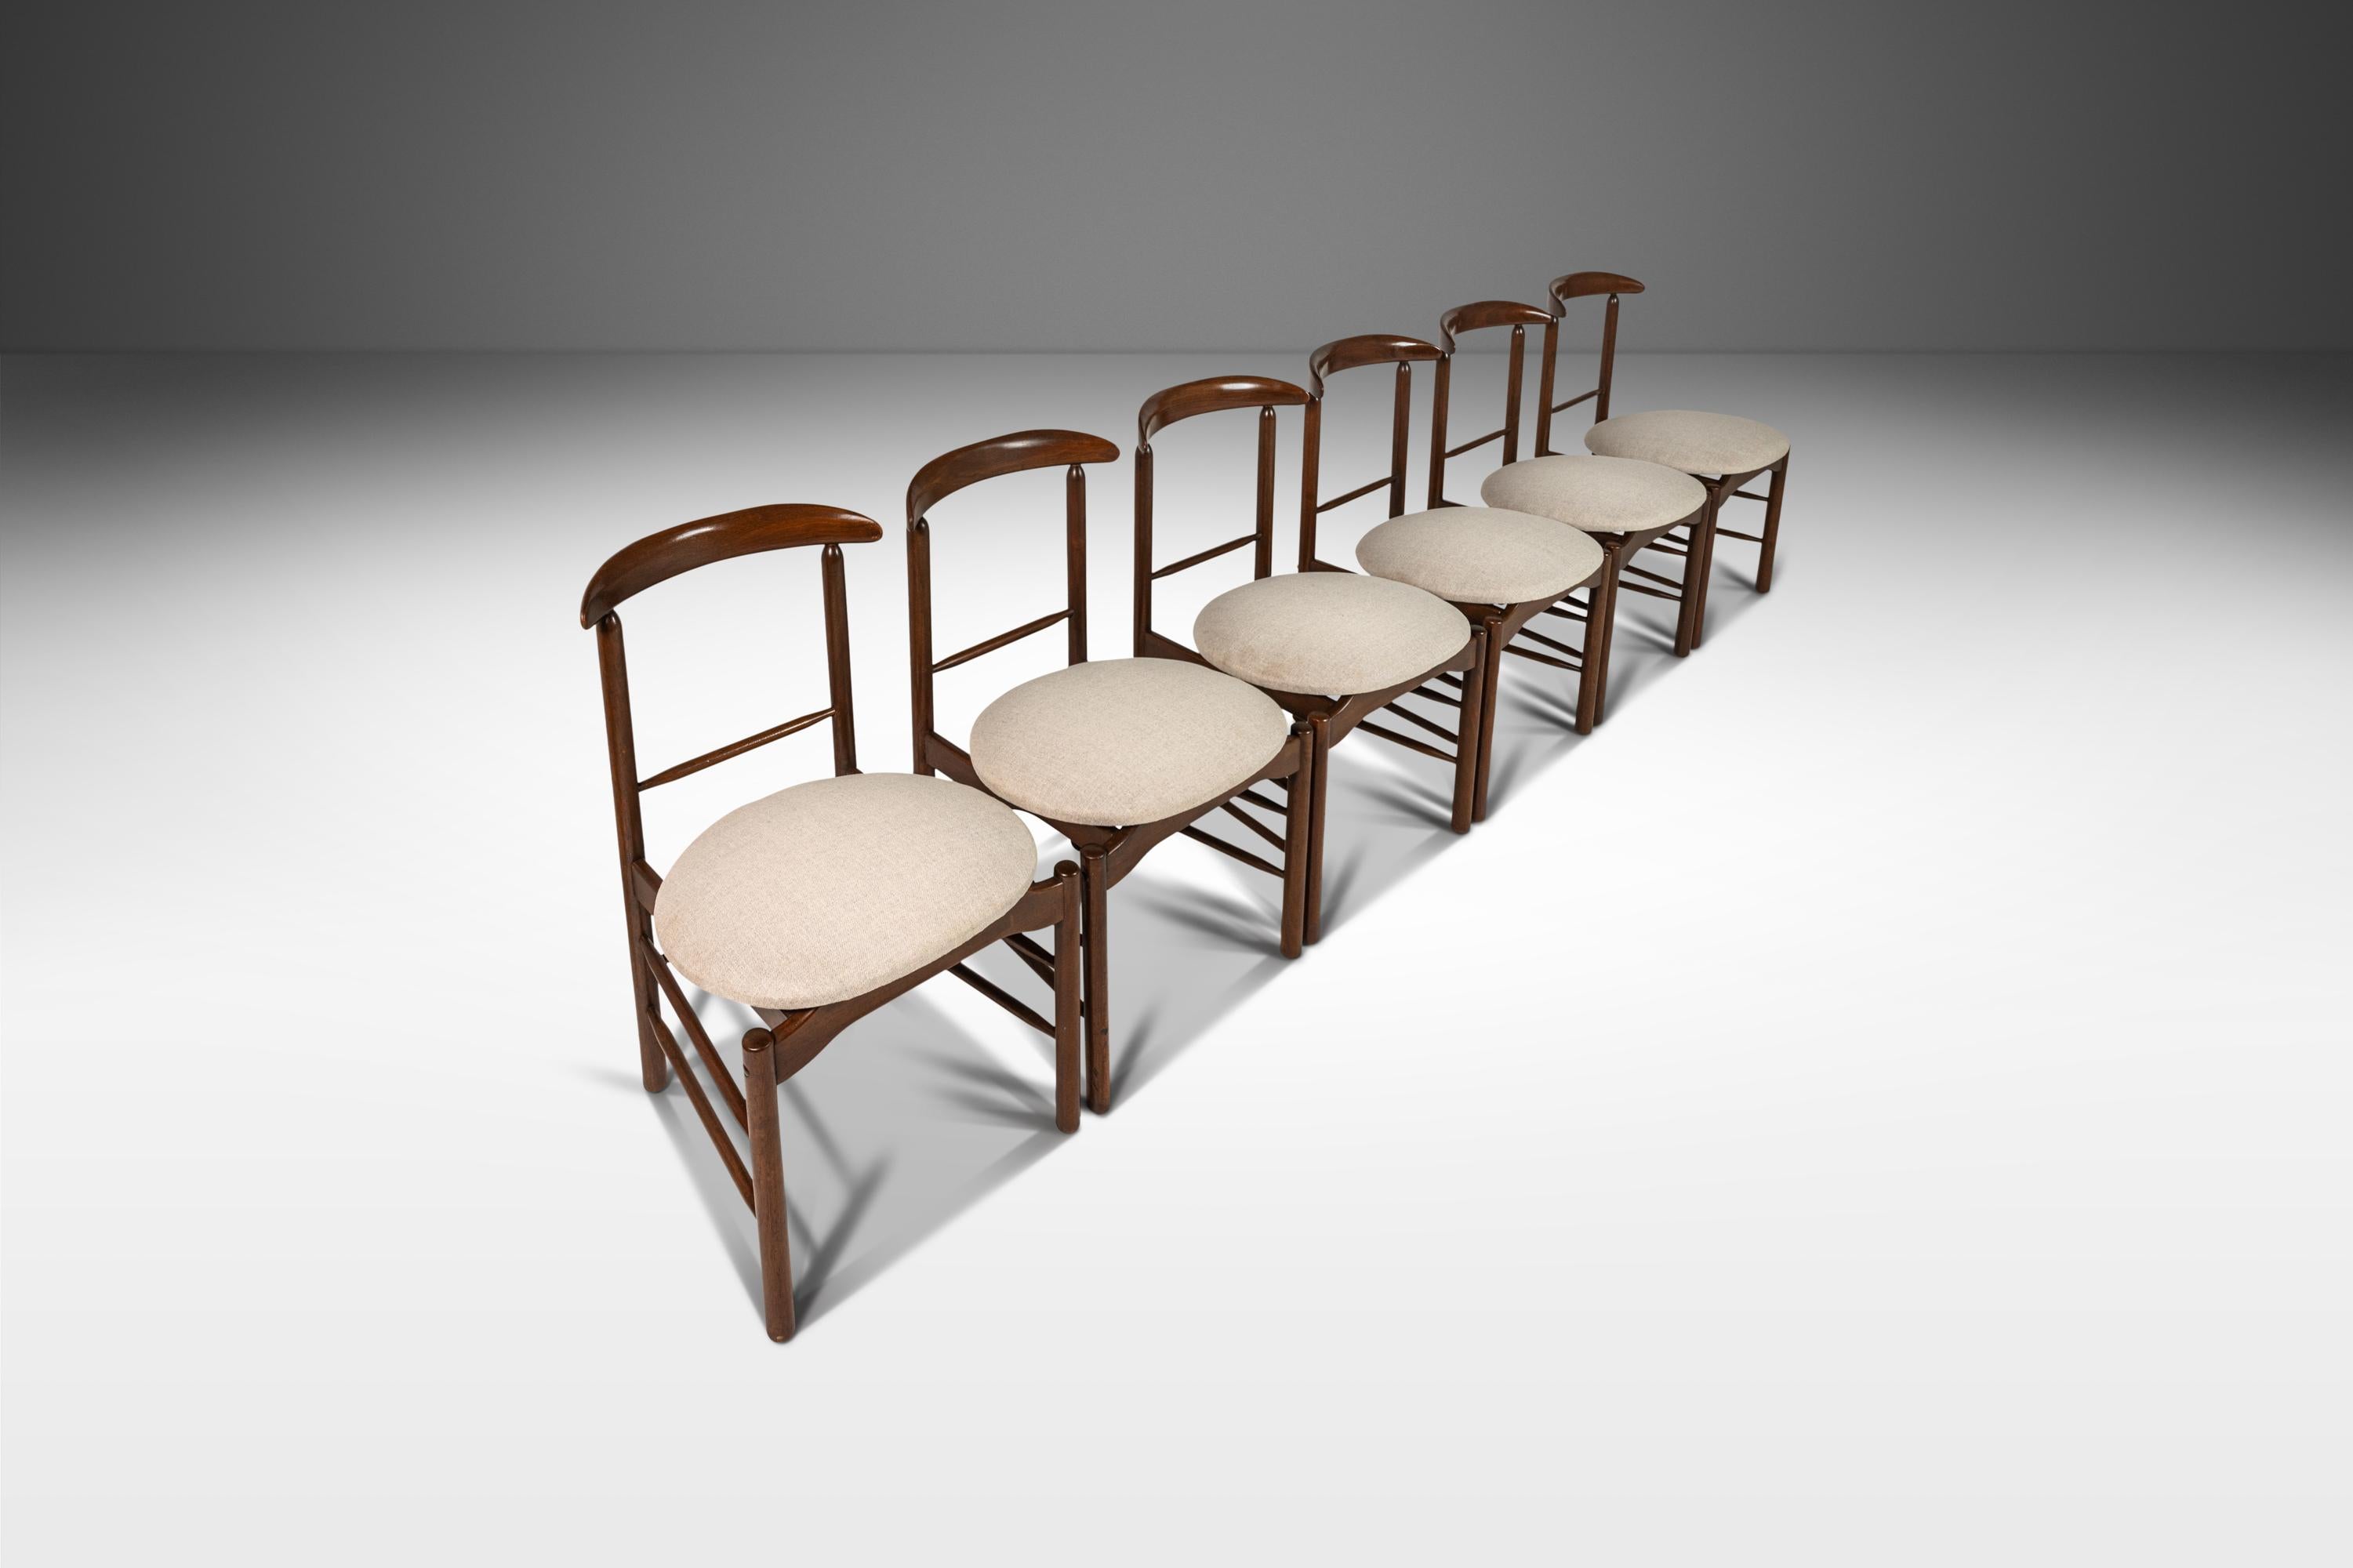 Designed by the seminal Greta Magnusson-Grossman this set of six dining chairs built by Glenn of California are the archetypal example of the early American Modern movement. An icon of both modern architecture and interior design in the Las Angeles